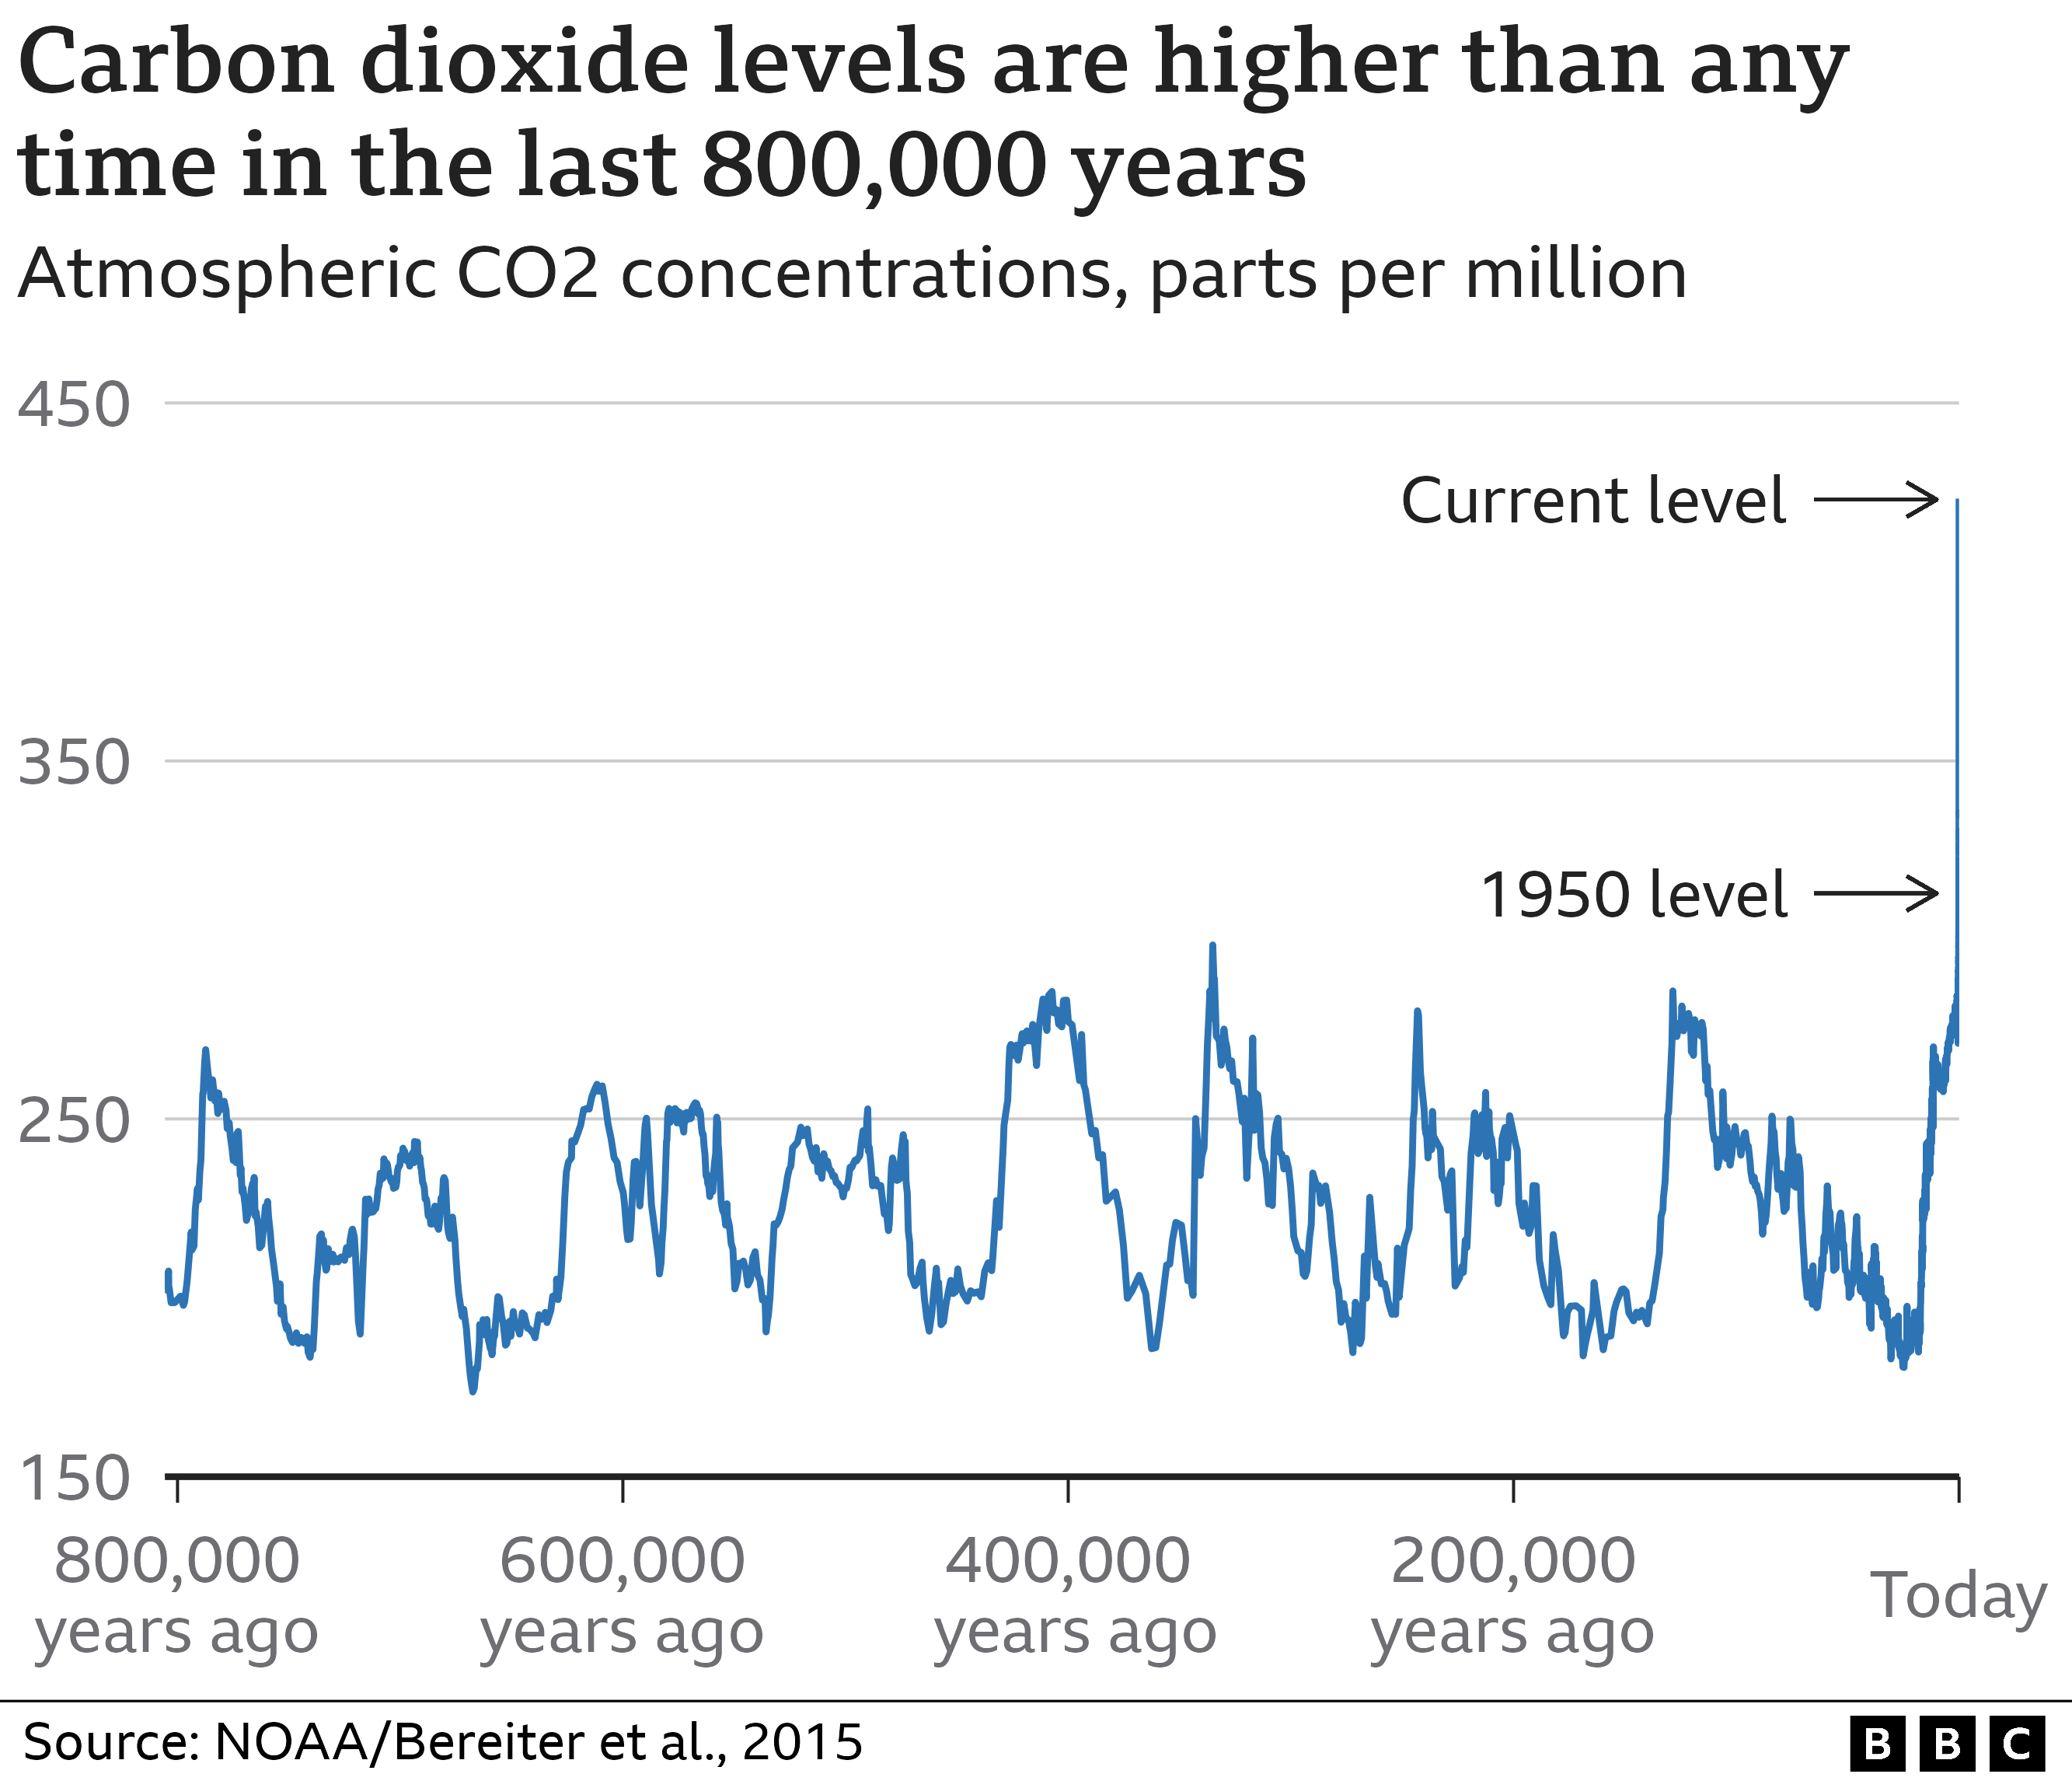 Over the last 800,000 years, CO2 concentrations in the atmosphere have fluctuated between about 180 and 300 parts per million in a sawtooth like pattern. Today, CO2 levels are around 420 parts per million and have risen sharply over the last century - a near vertical line on the graph.